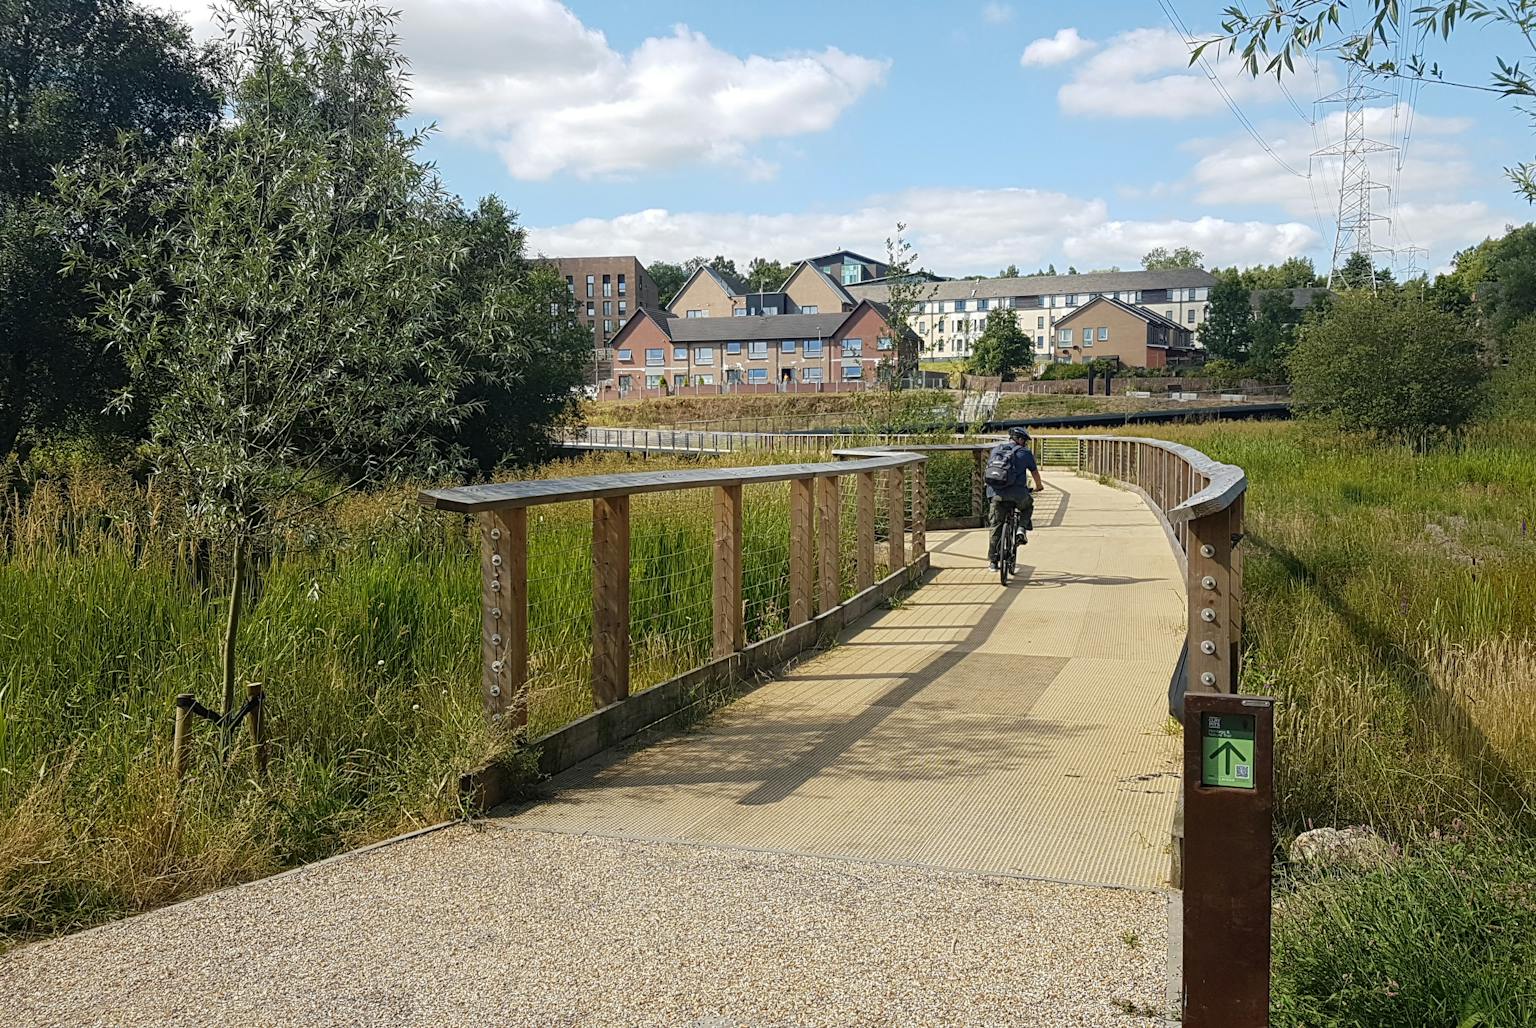 A man on a bike riding over a bridge towards some houses